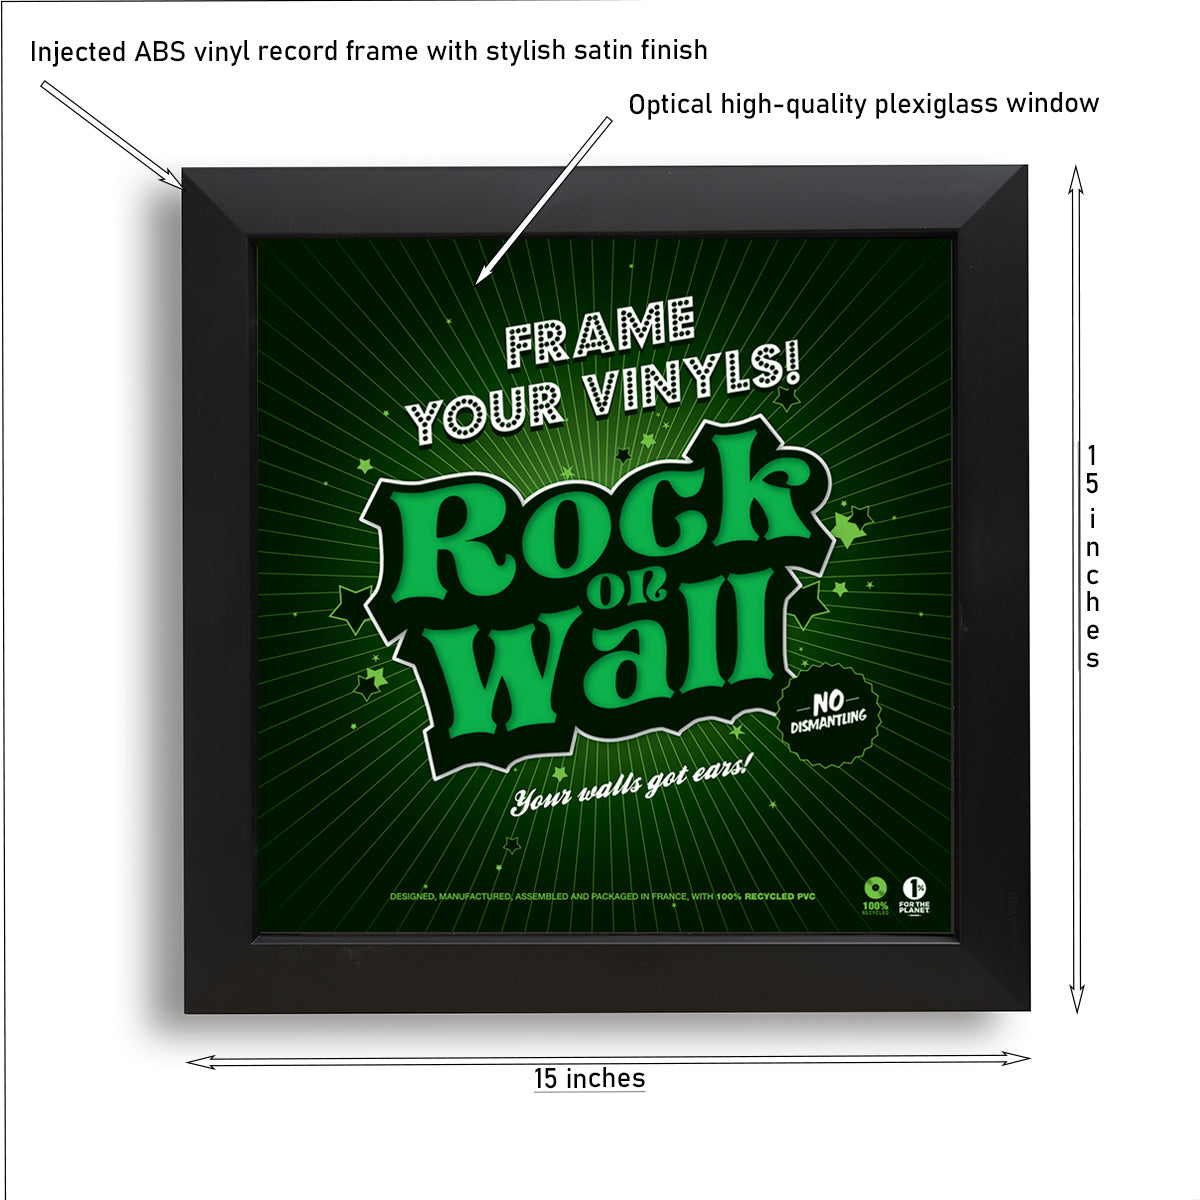 Set of 3 Vinyl Record Wall Display Frame - Awesome gift for Vinyl collector To Display and Protect 33LP on the Wall